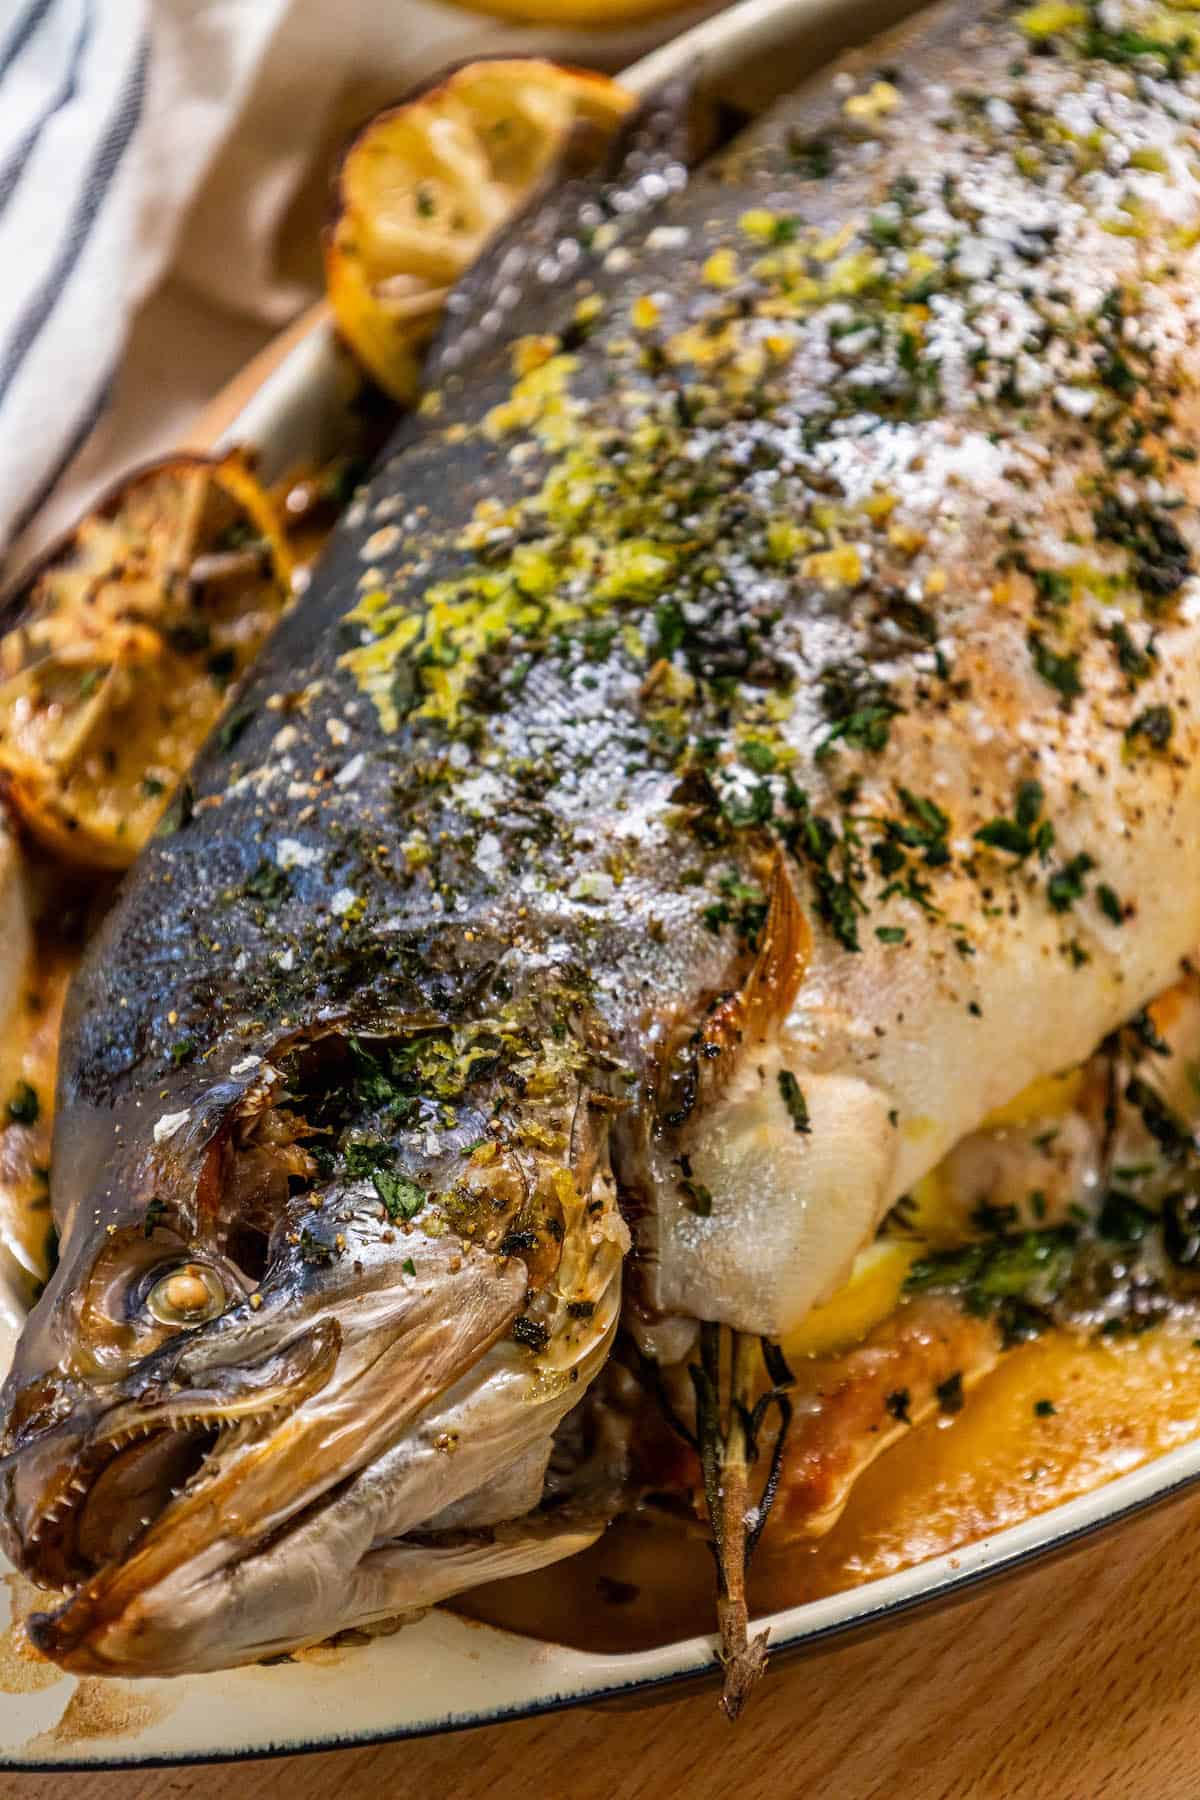 Herb Stuffed Roasted Arctic Char with lemons and herbs.